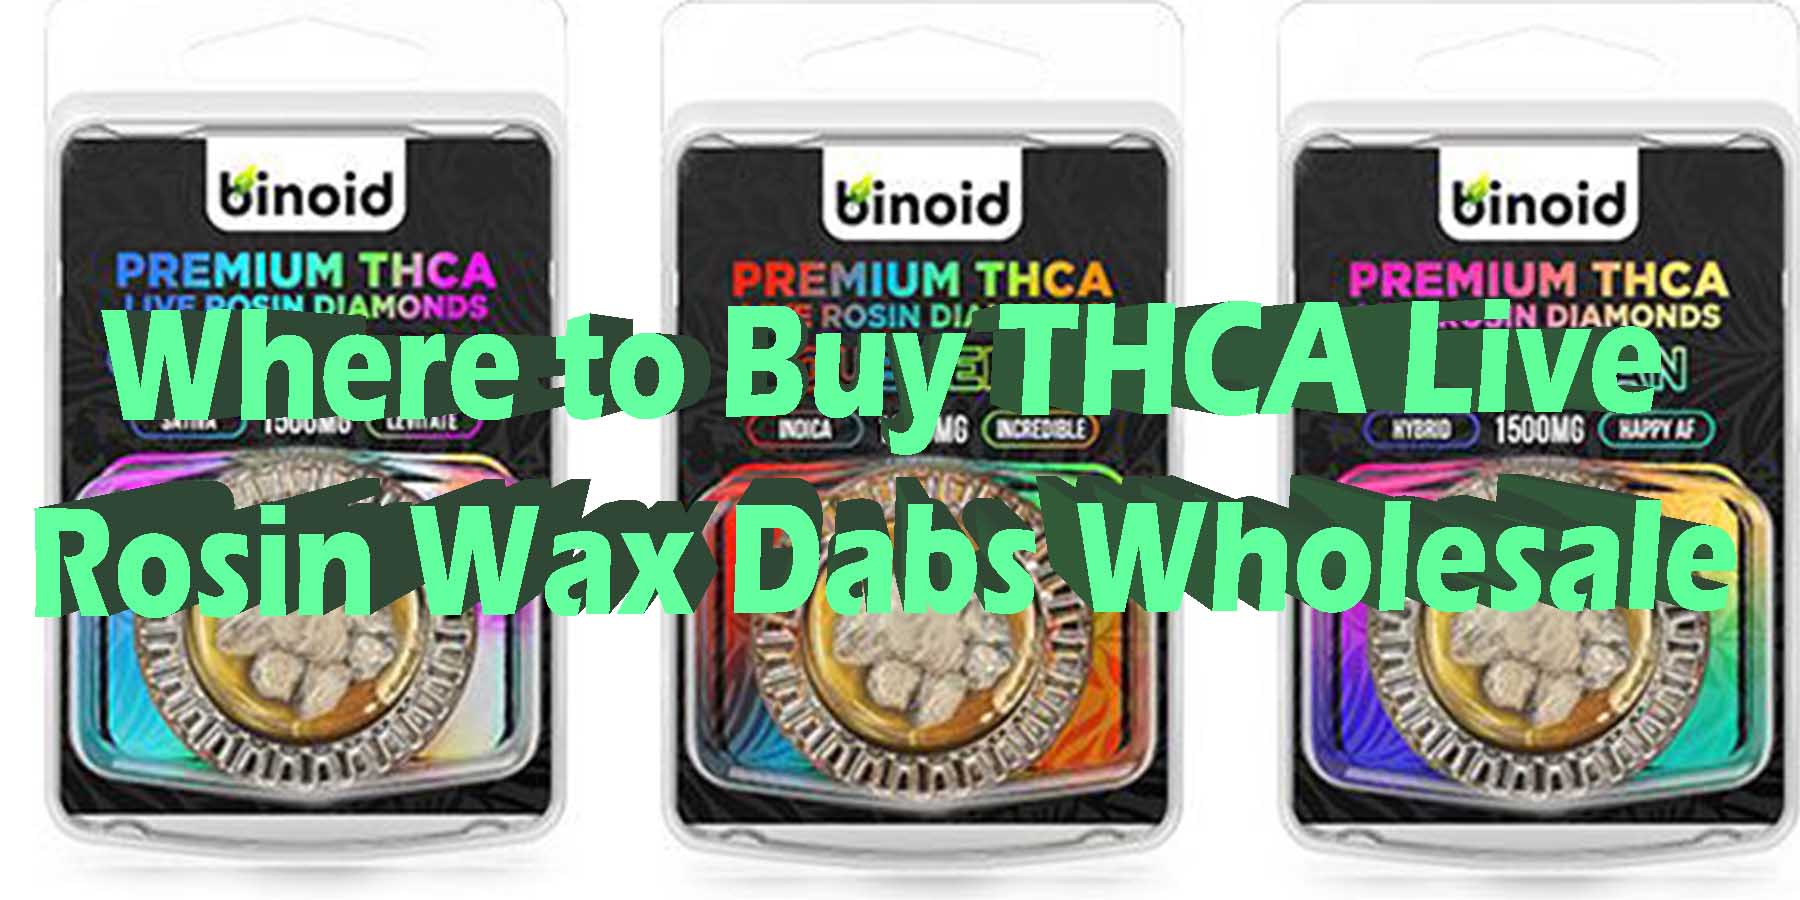 Where to Buy THCA Live Rosin Wax Dabs Wholesale WhereToGet HowToGetNearMe BestPlace LowestPrice Coupon Discount For Smoking Best High Smoke Shop Online Near Me Binoid